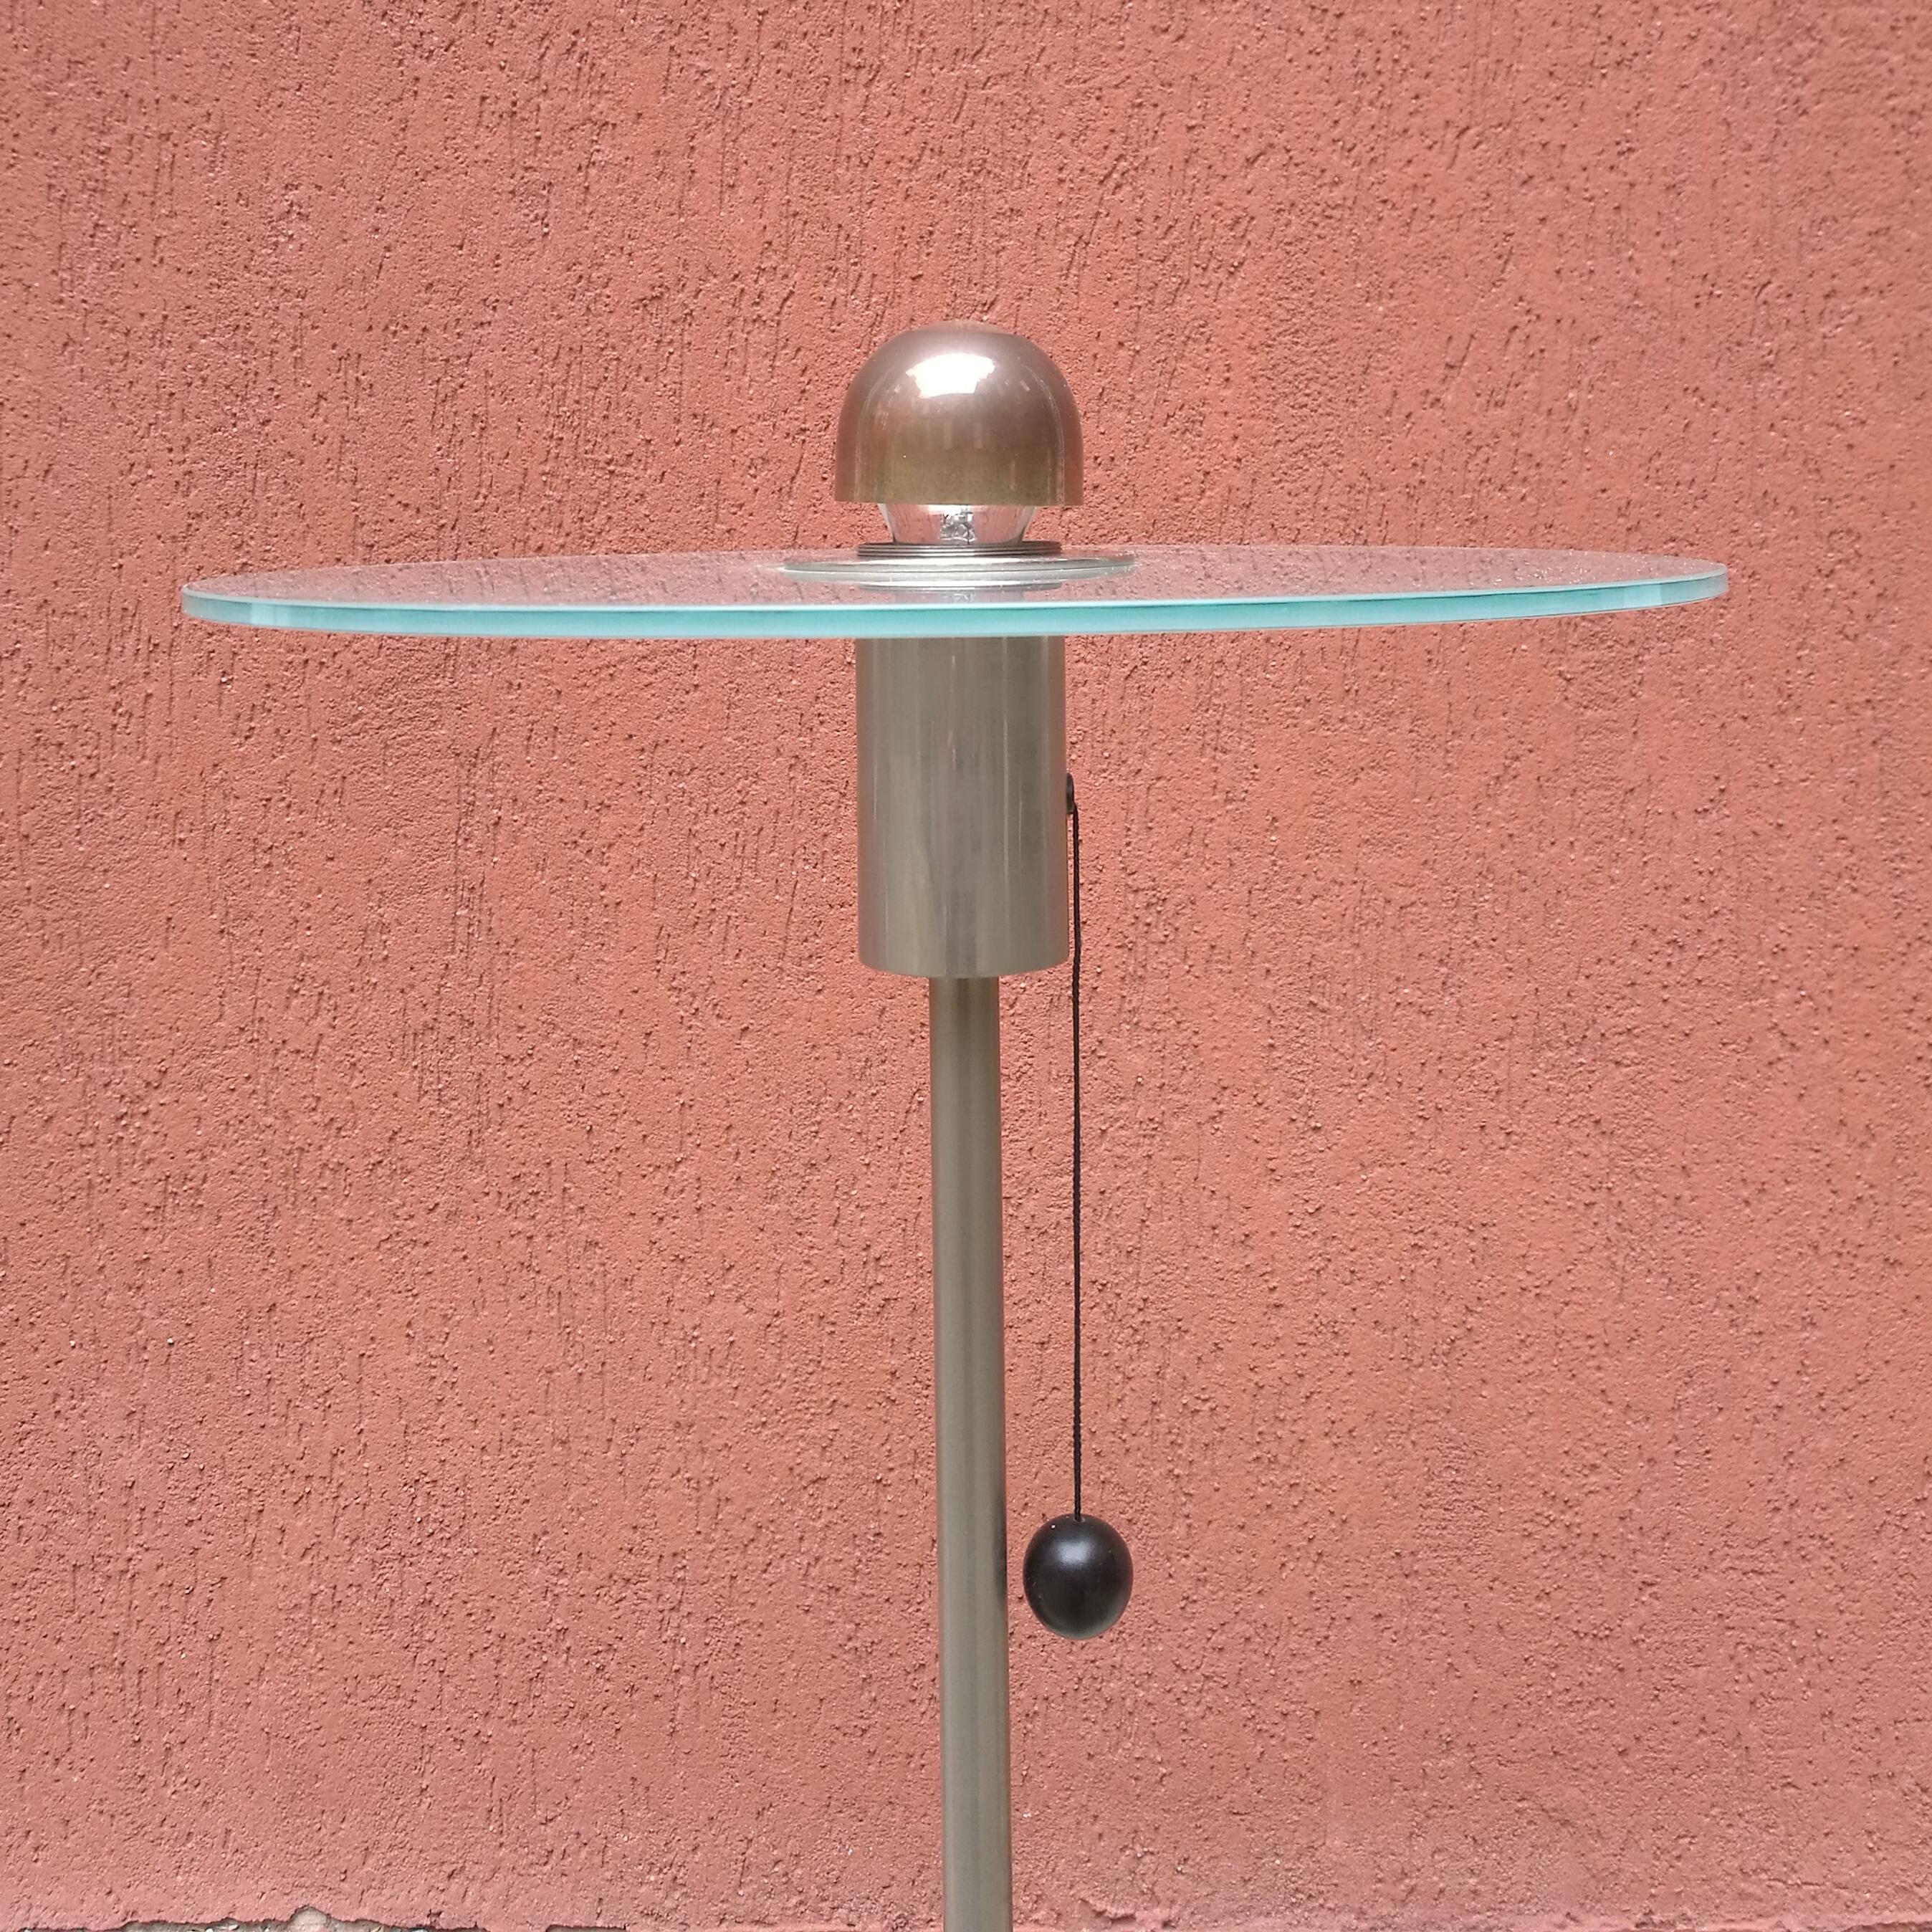 Italian steel and glass floor lamp mod. BST23 by Gyula Pap for Tecnolumen, 1923
Floor lamp mod. BST23, with satin-finish steel structure and circular glass shade and with a small copper-perforated bell that rests on the bulb and allows directing the